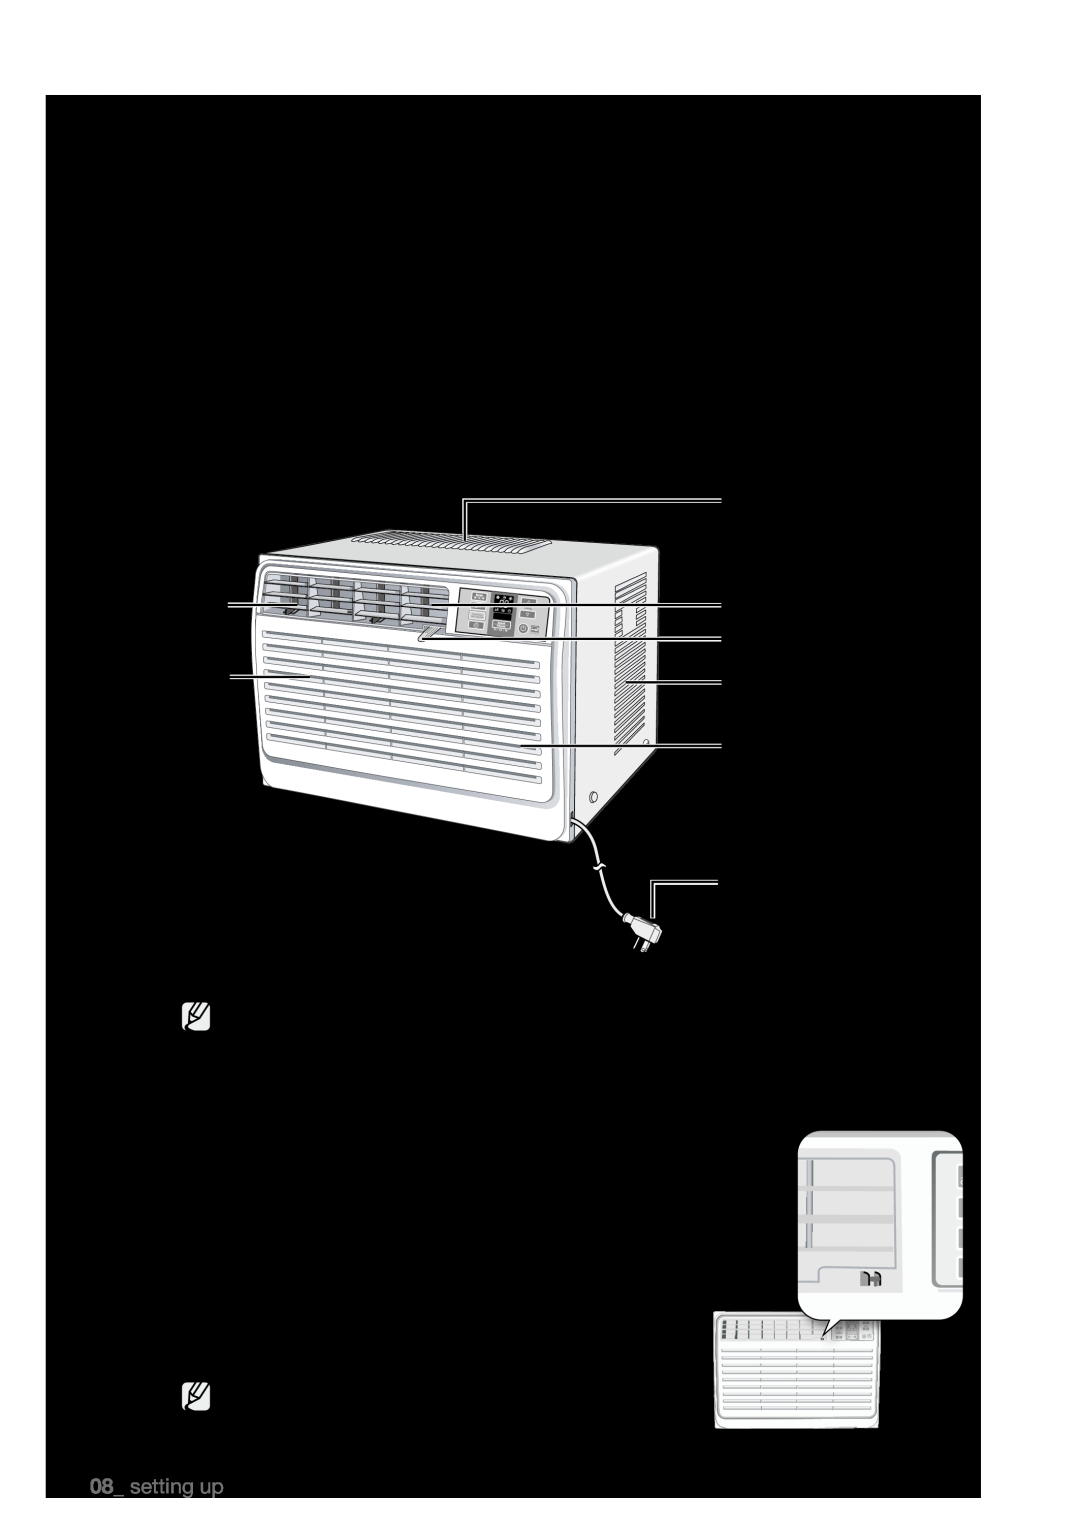 Samsung AW08EDB Series setting up your air conditioner before use, Checking The Parts And The Control Panel, Main parts 